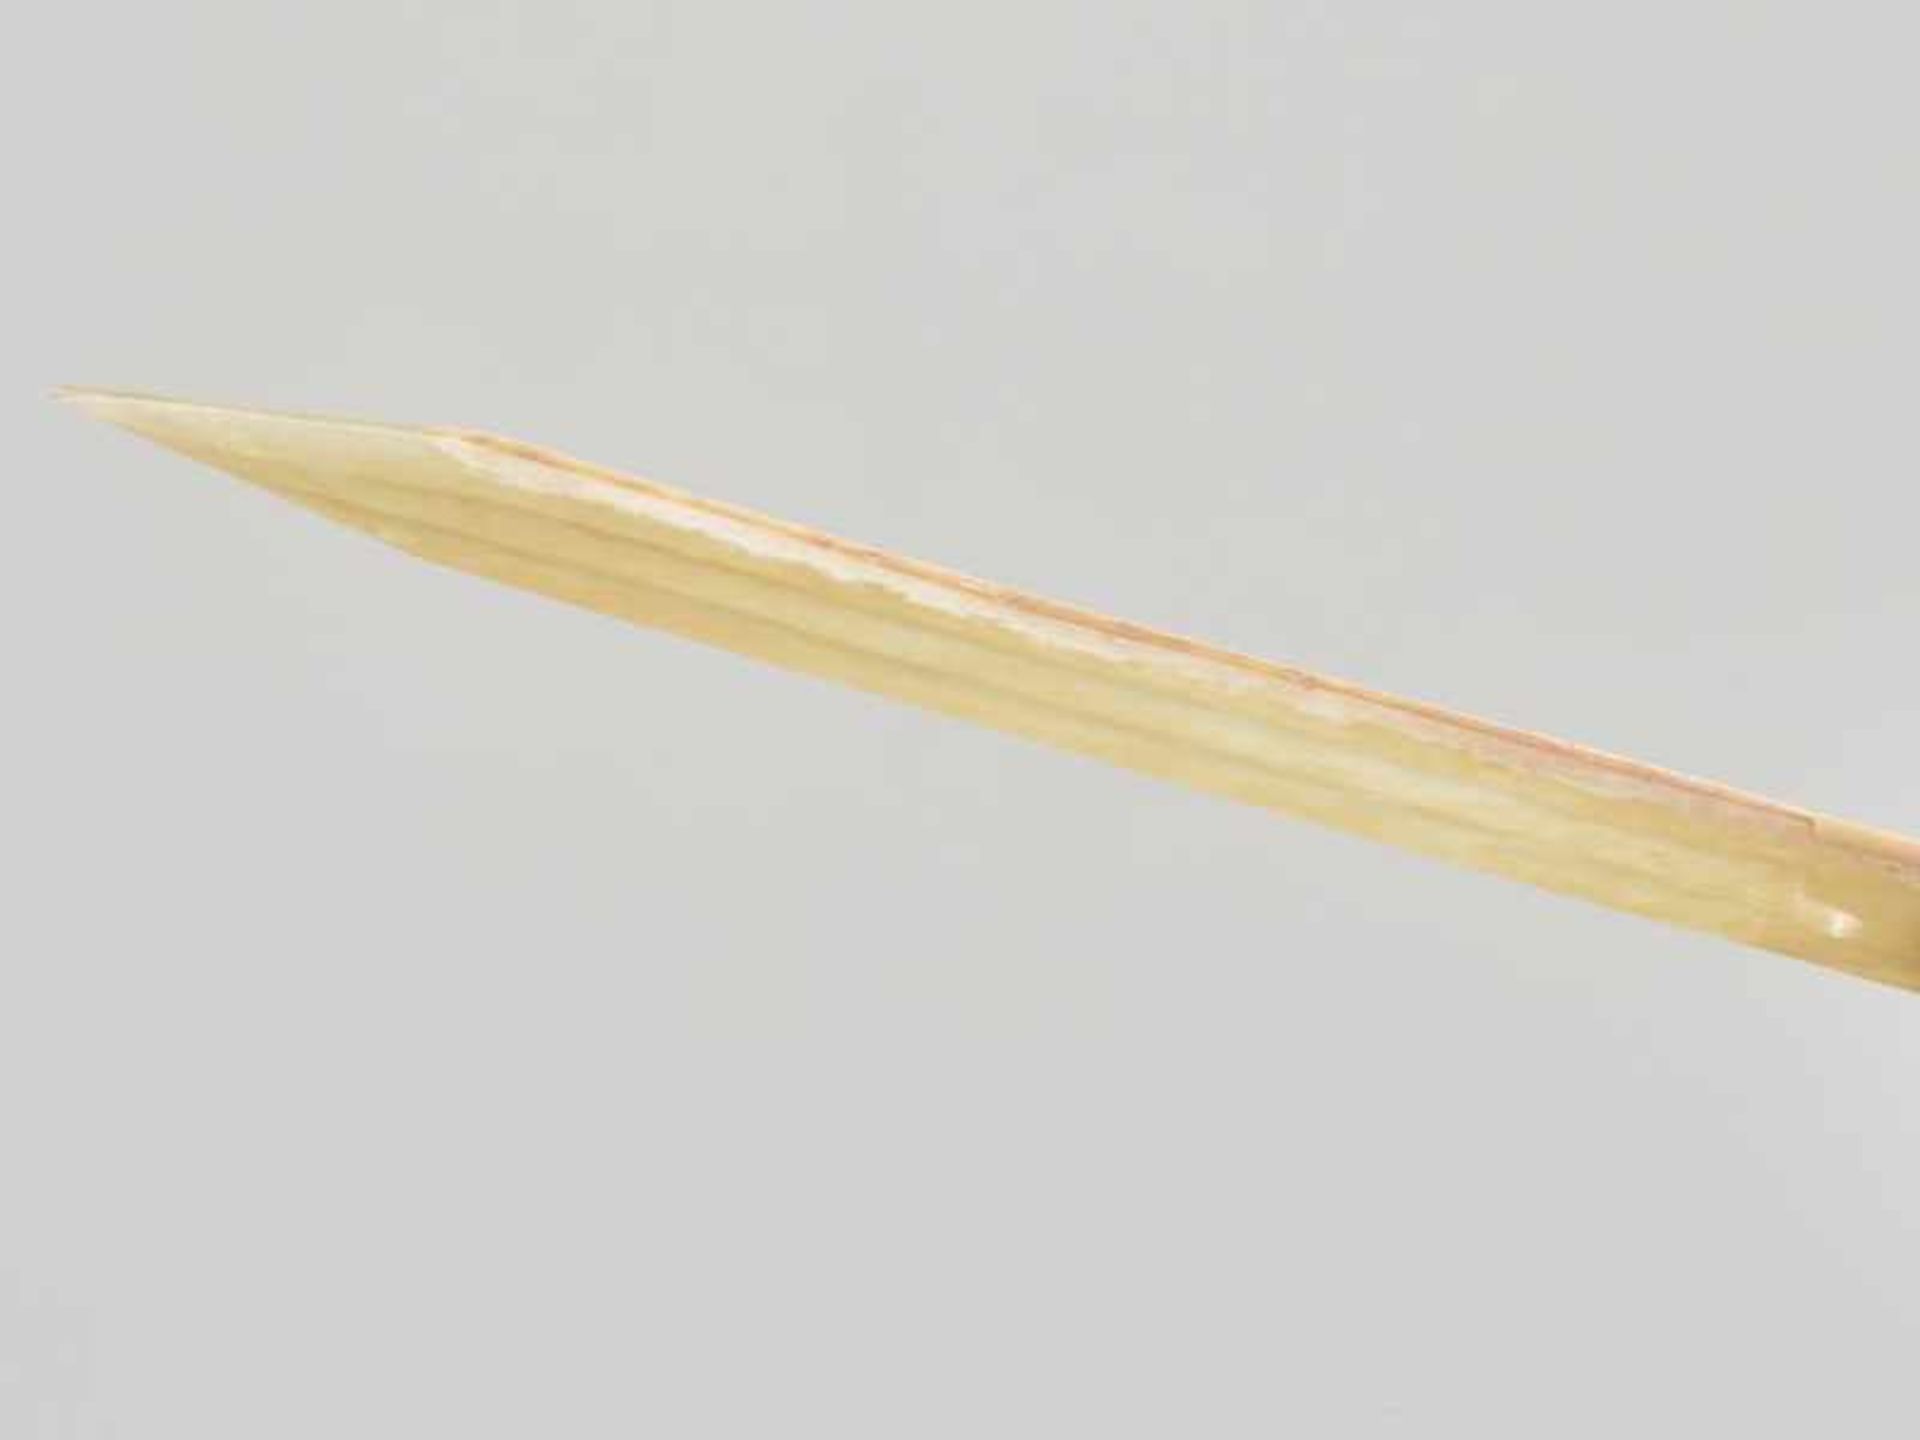 A FINELY CARVED SMALL GE DAGGER-AXE IN YELLOWISH JADE WITH DELICATE GROOVES Jade. China, Late Shang, - Image 4 of 7